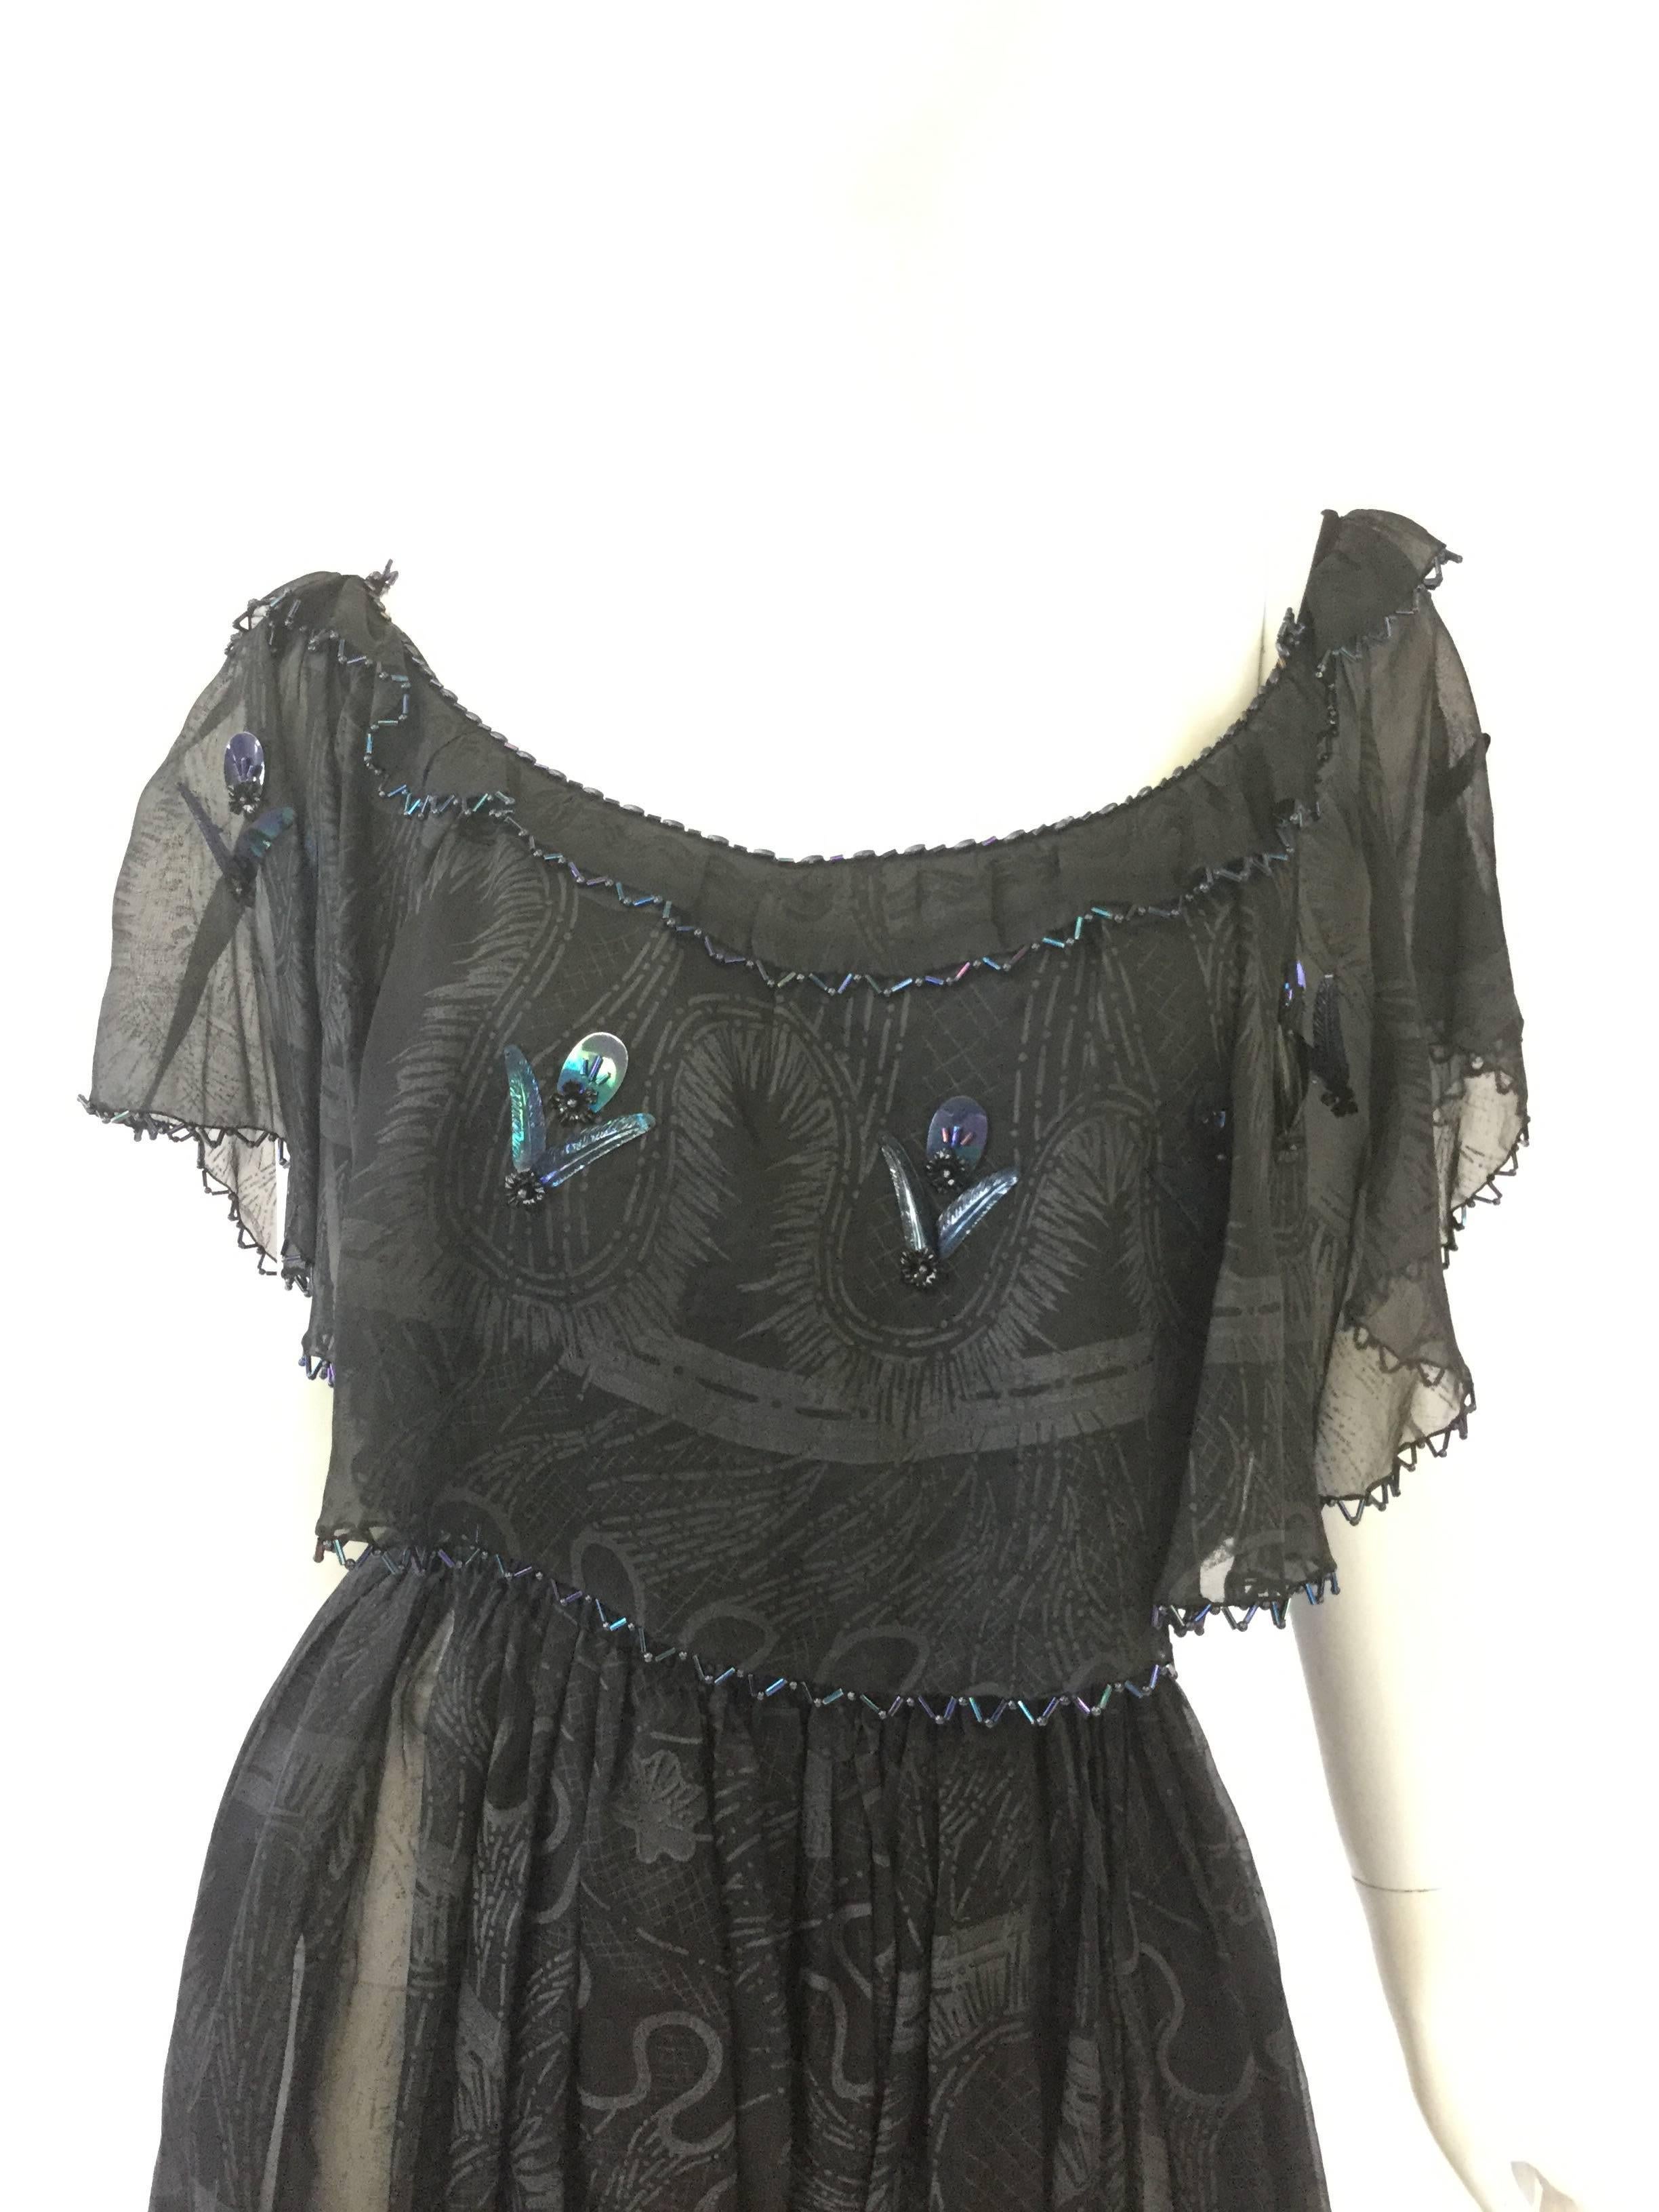 This gorgeous black silk illusion dress features a large hand painted hand stenciled abstract organic mandala-like print in grey and black. The sleeveless dress has a caplet collar with carnival glass bead trim and has elastic on the shoulder. The